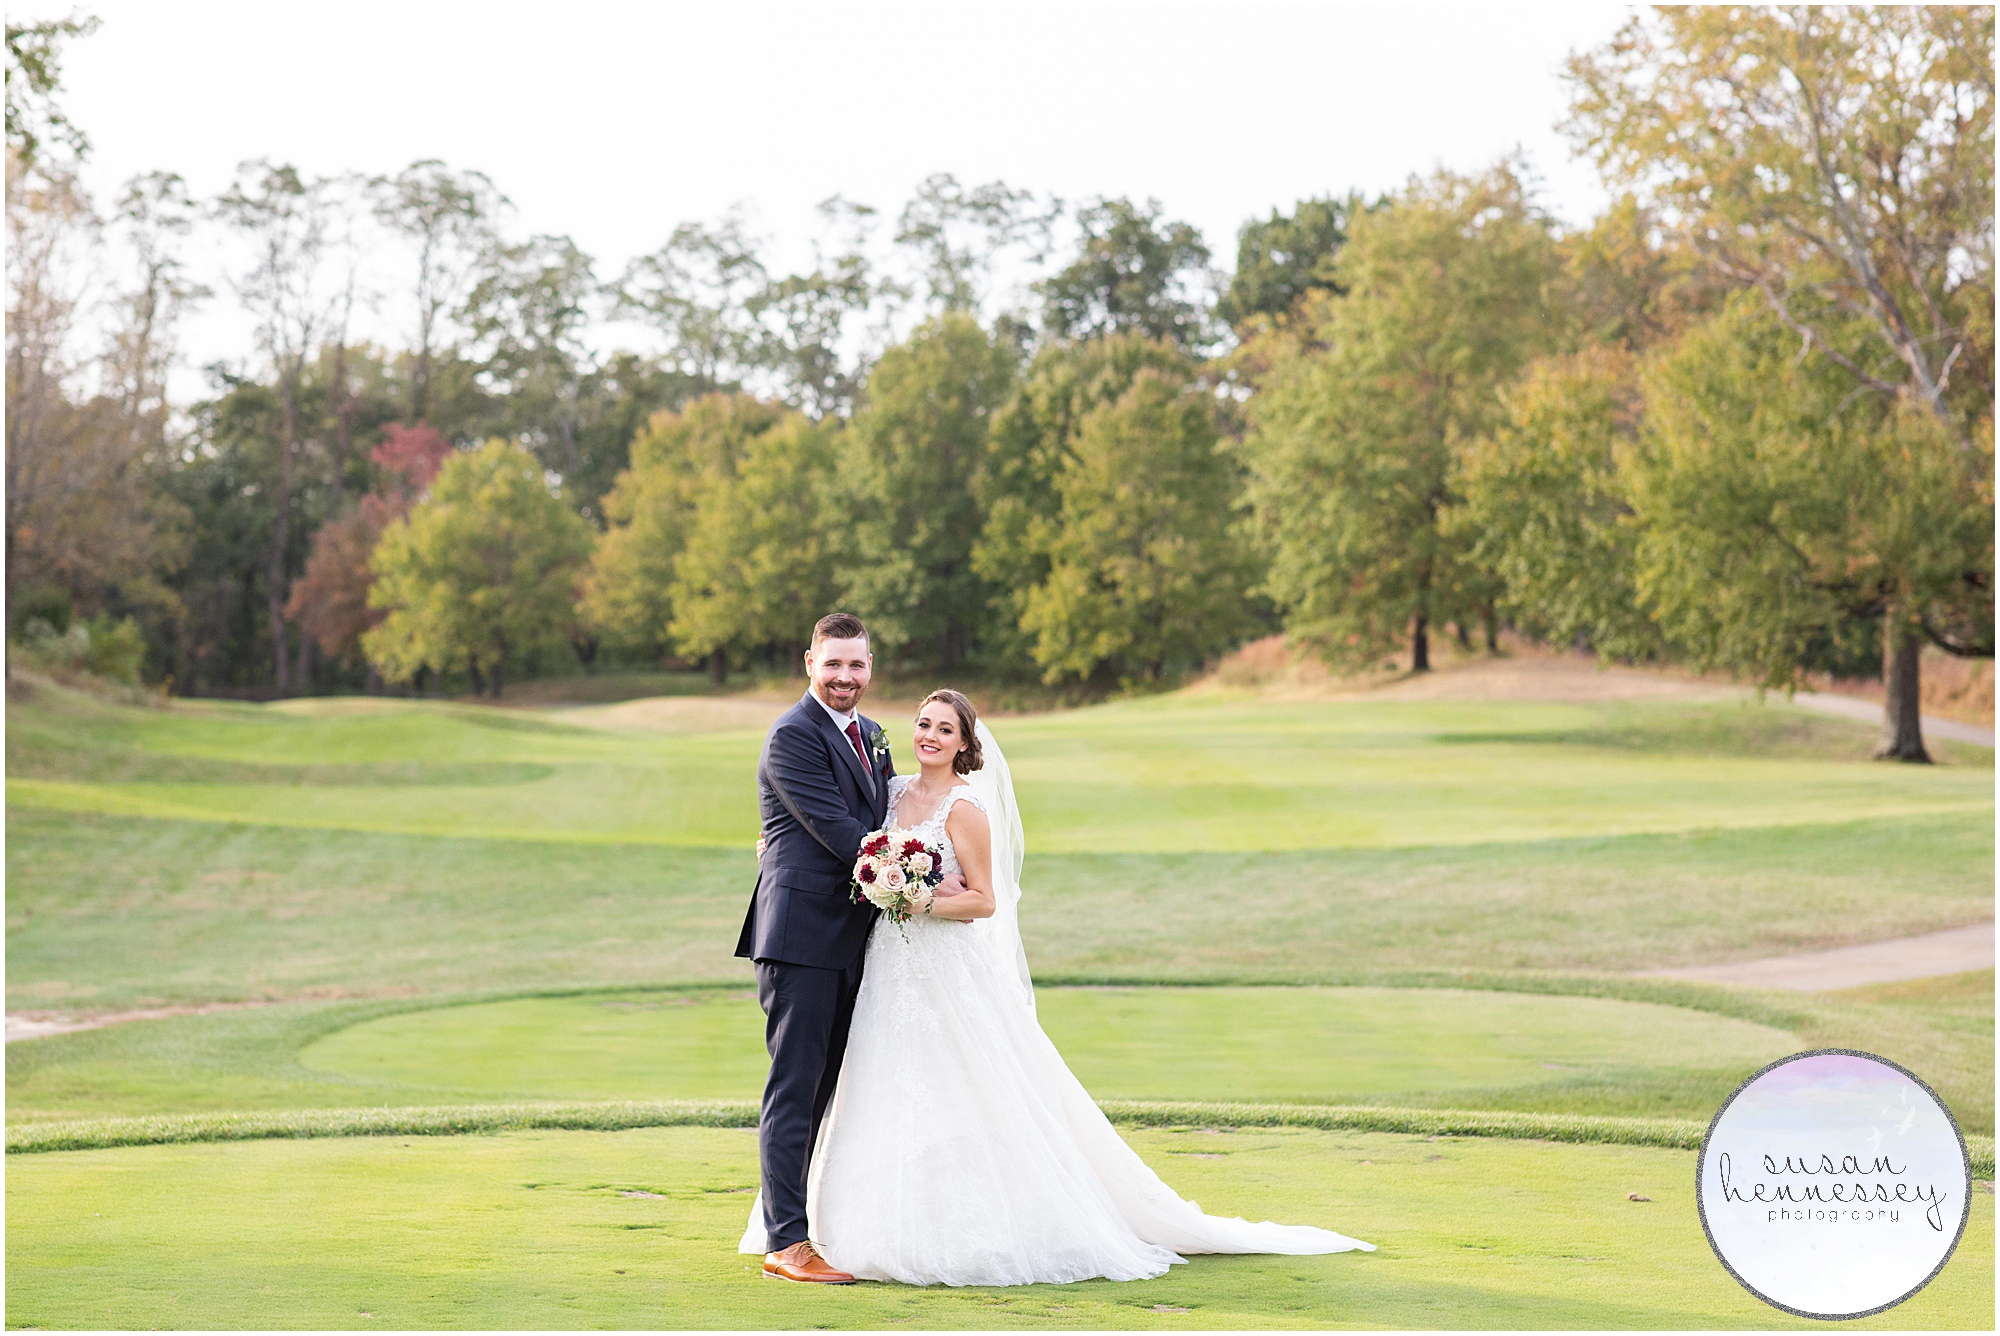 Bride and groom portraits following ceremony at Wedding at Old York Country Club